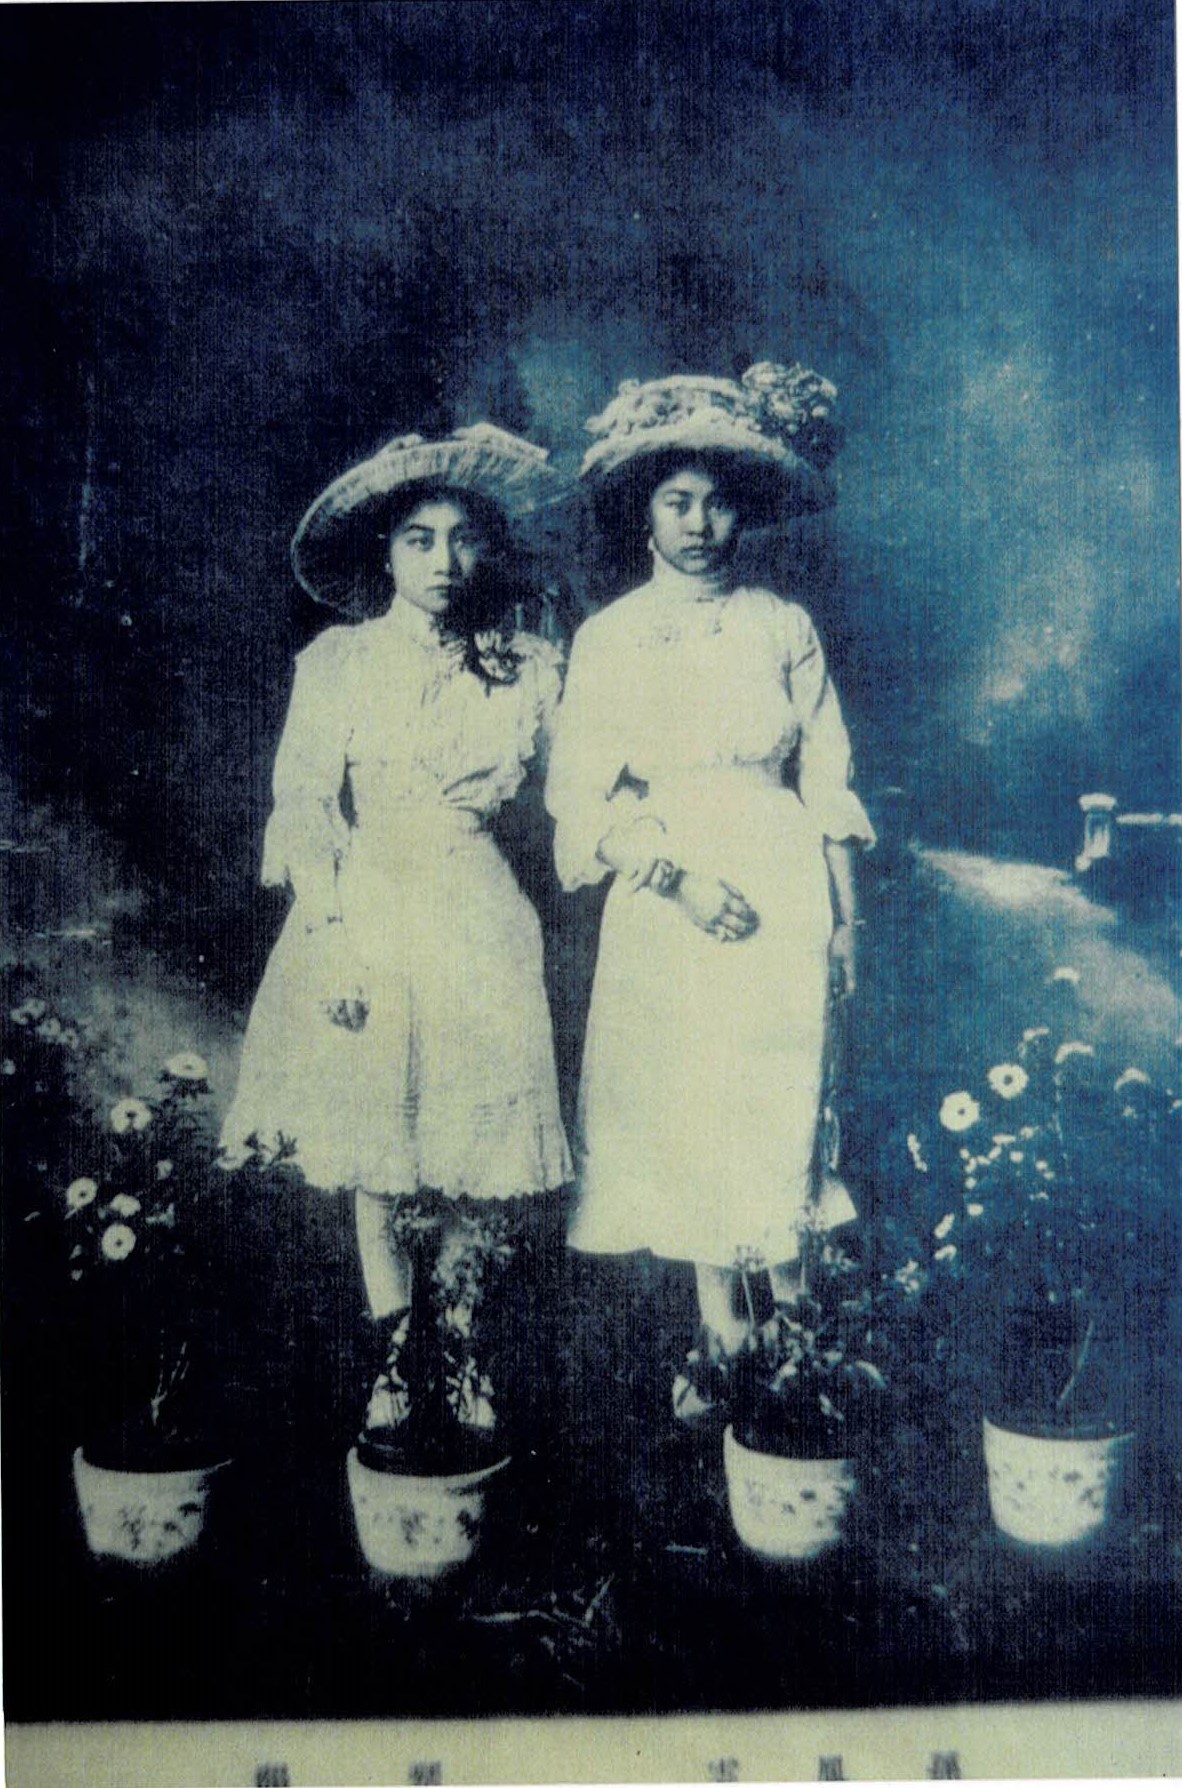 A black-and-white image shows two young girls wearing white Western dresses and large flowered hats. They stand with linked arms in a setting with four small flowerpots on the ground.